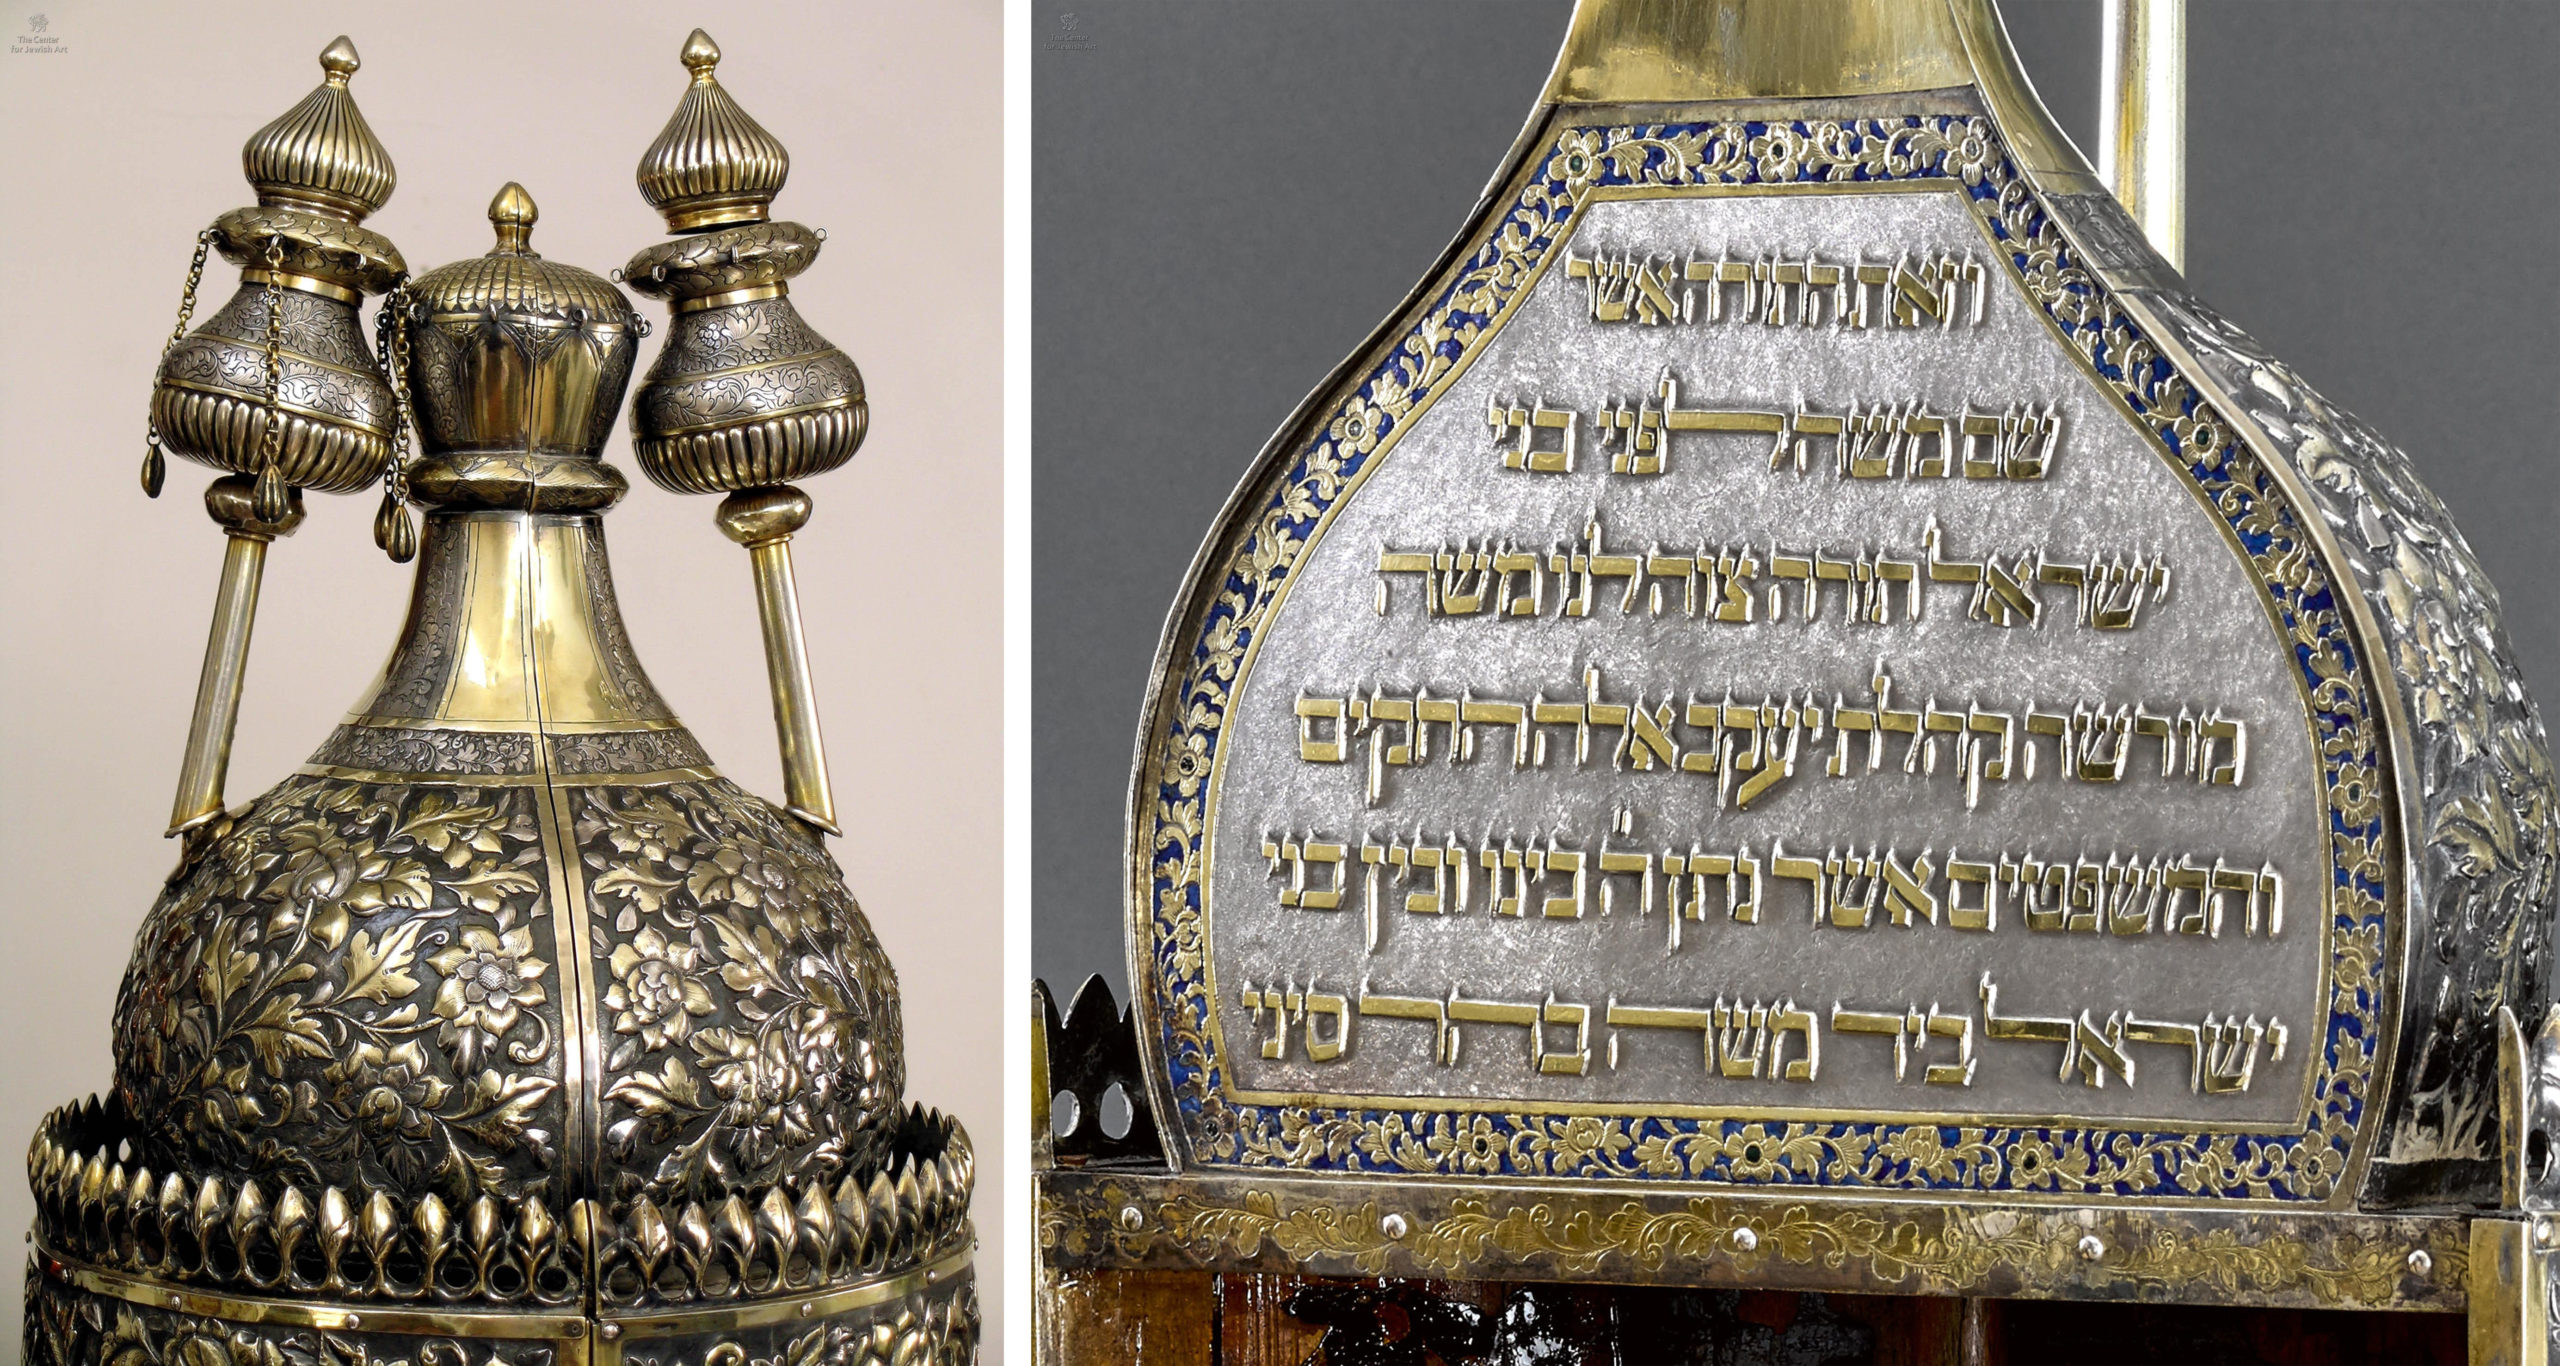 Left: Dome and finials; right: dedication inscription, Torah case, Guangzhou, China, 1886, oxidized silver, silver, and silver-gilt, 92.6 x 30 cm (Center for Jewish Art) 